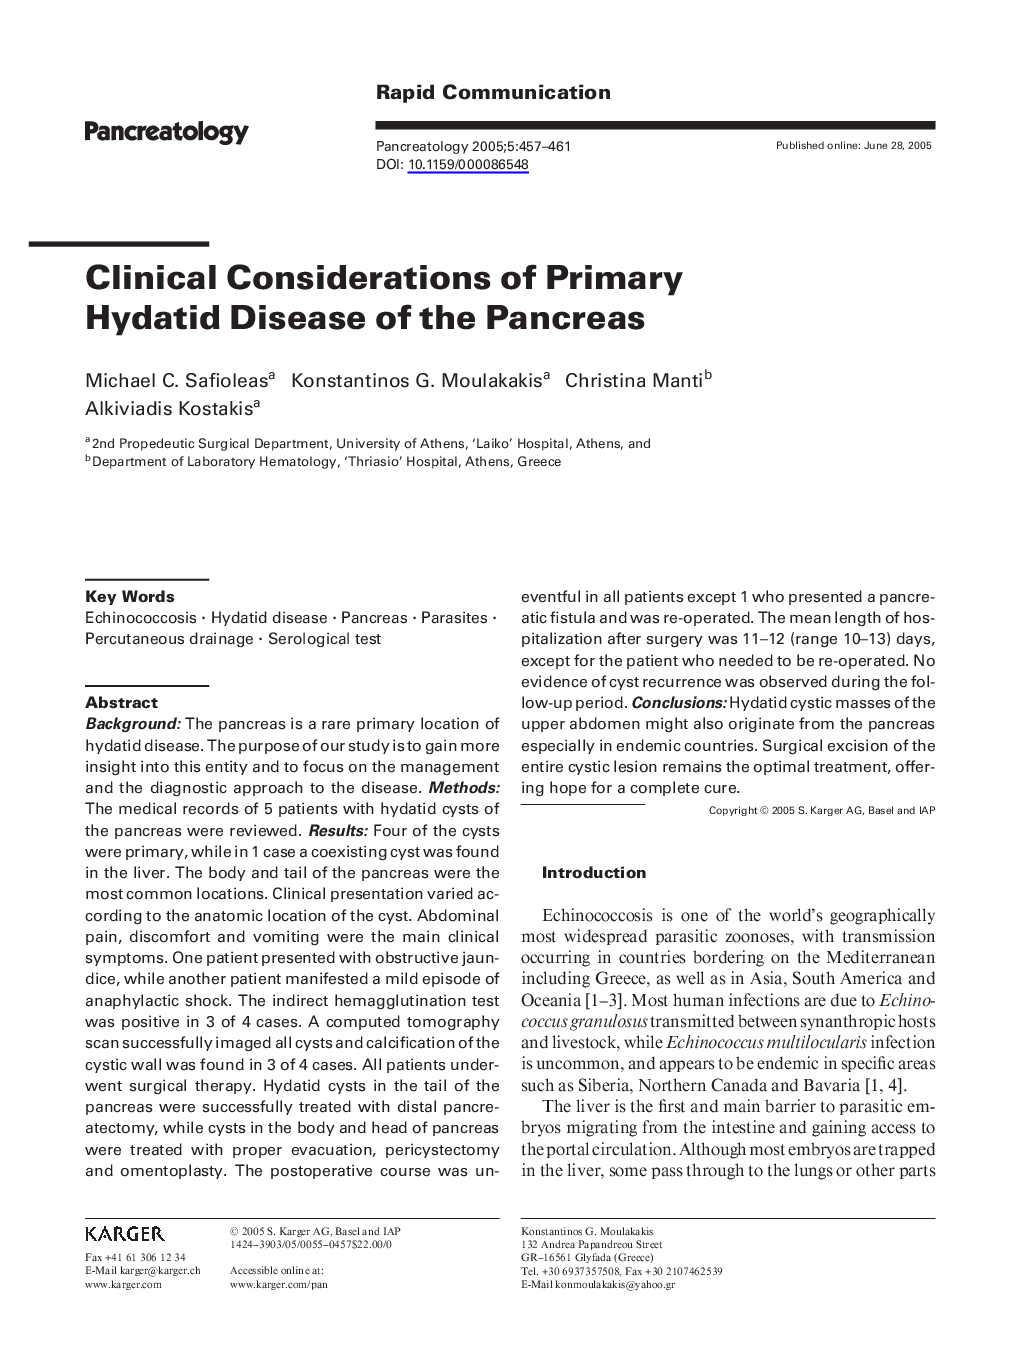 Clinical considerations of primary hydatid disease of the pancreas